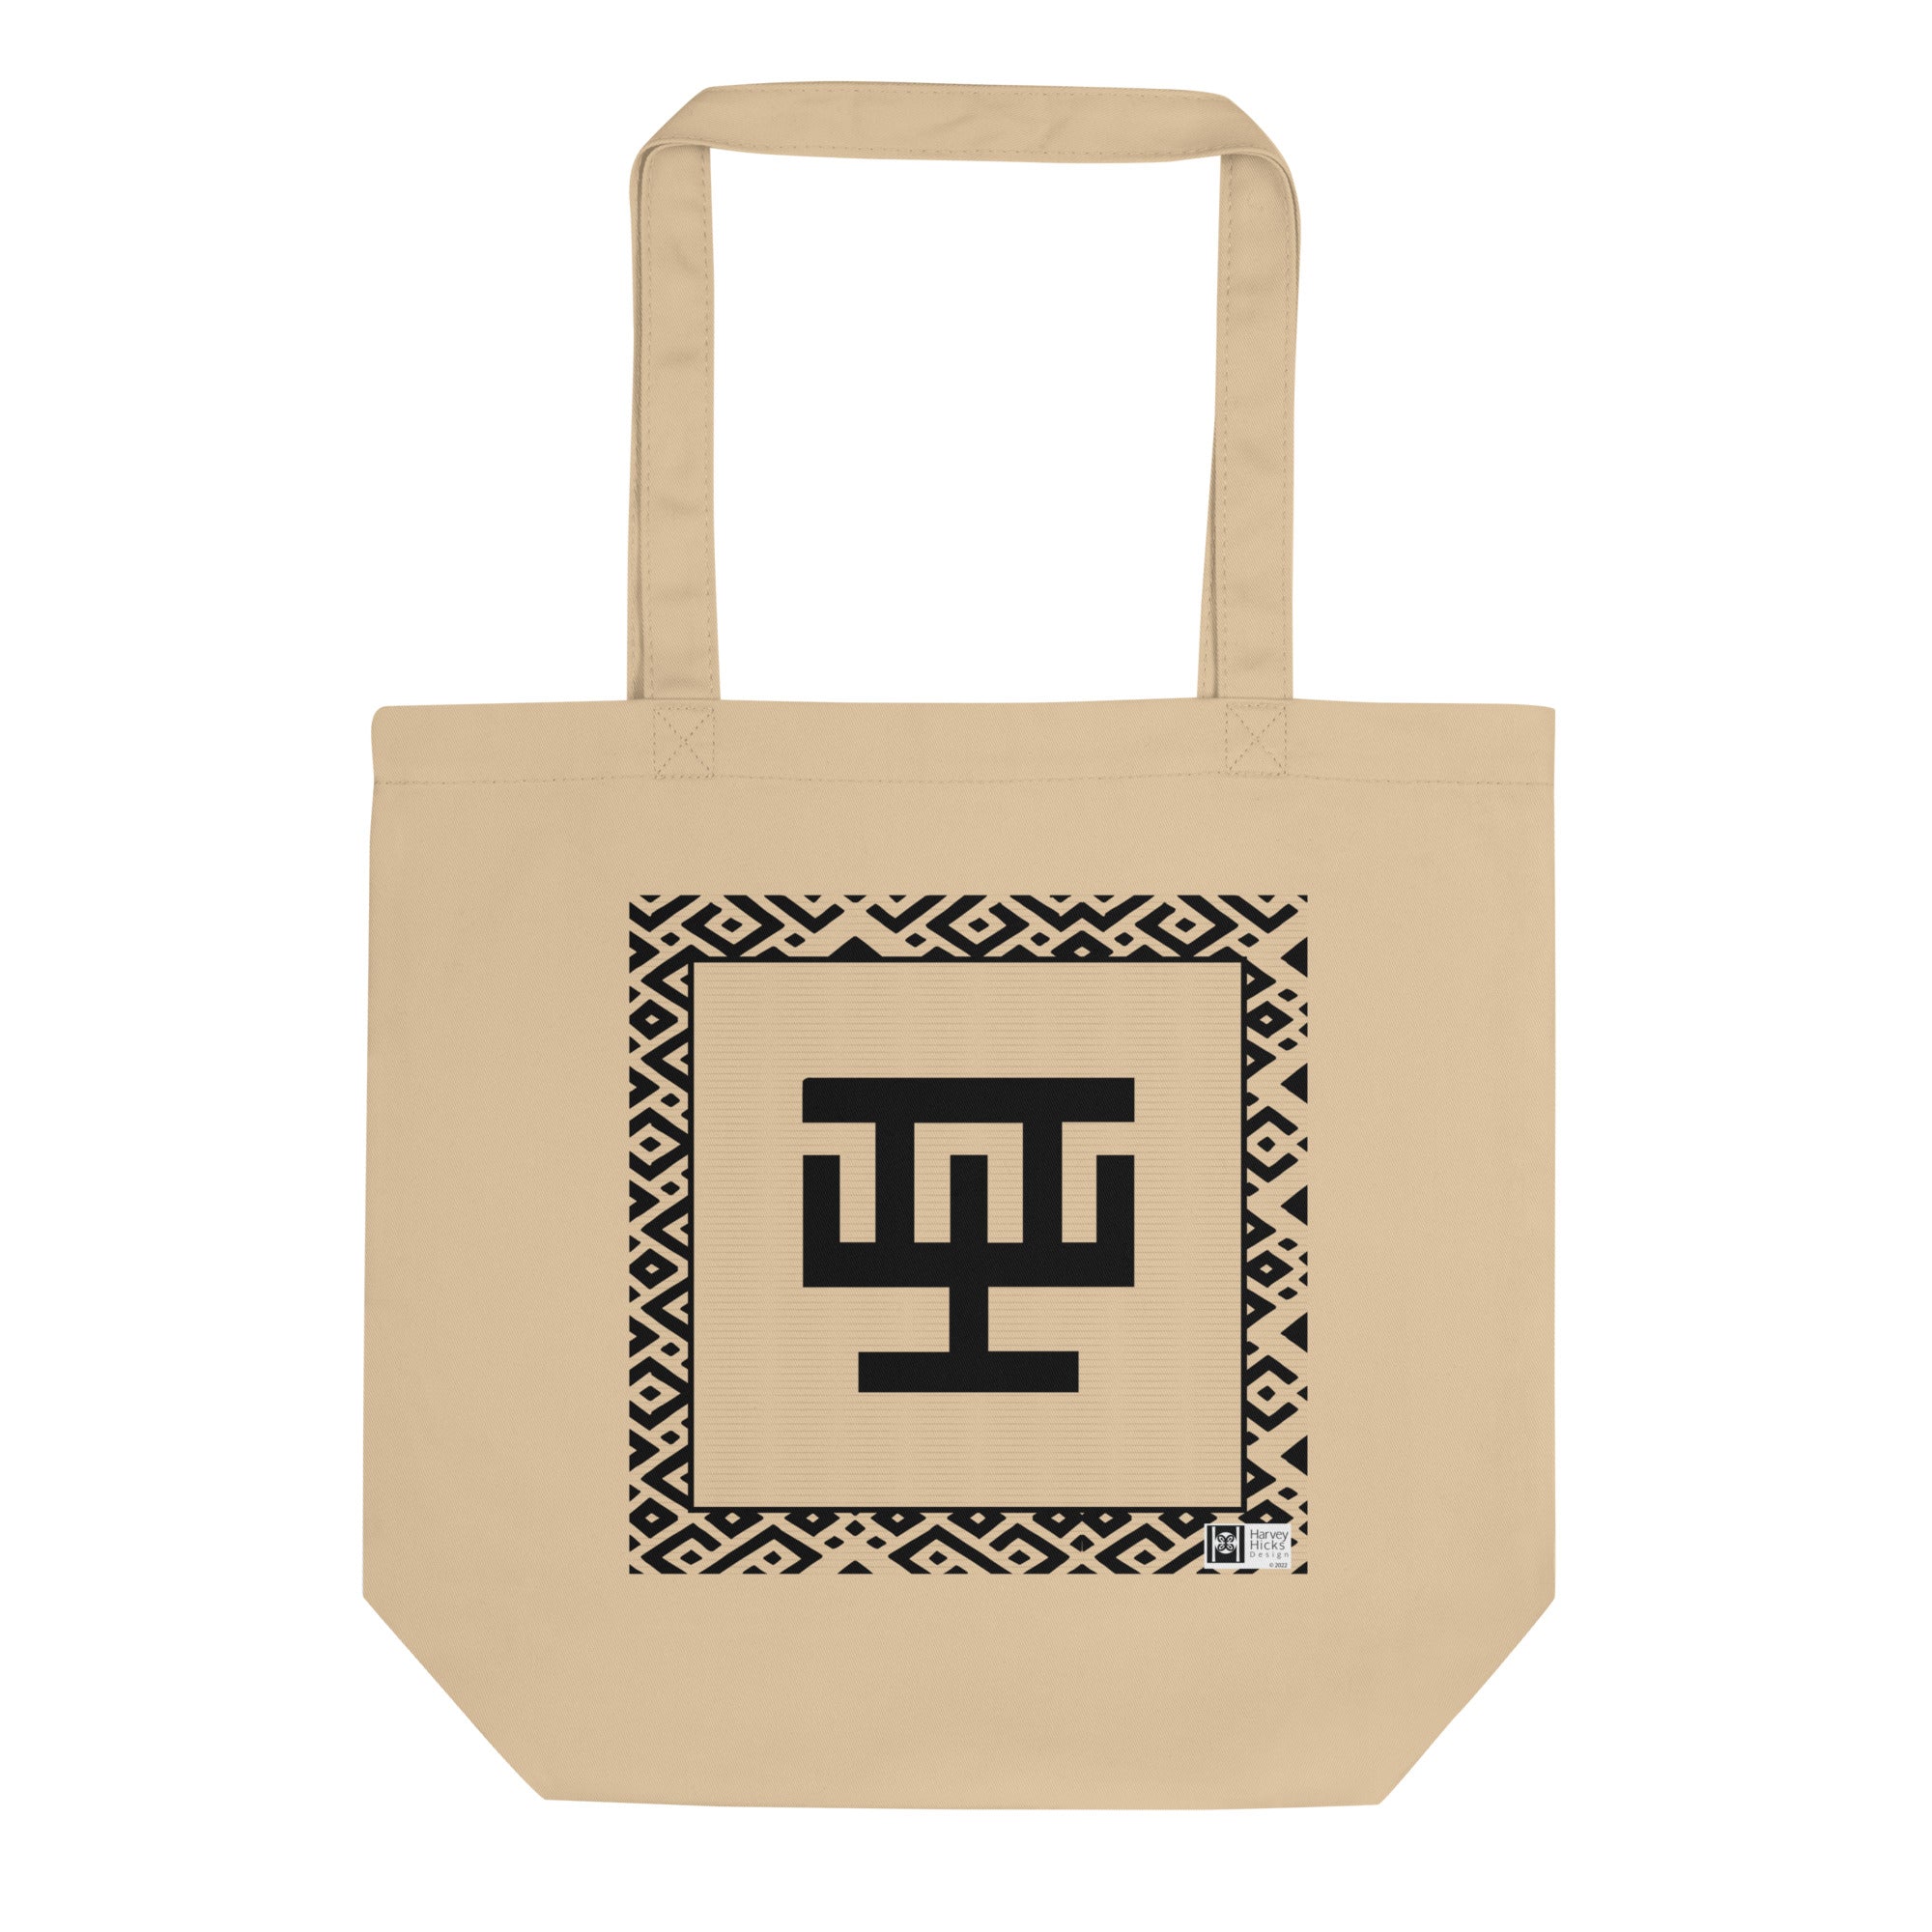 100% cotton Eco Tote Bag, featuring the Adinkra symbol for perfection, NO TEXT